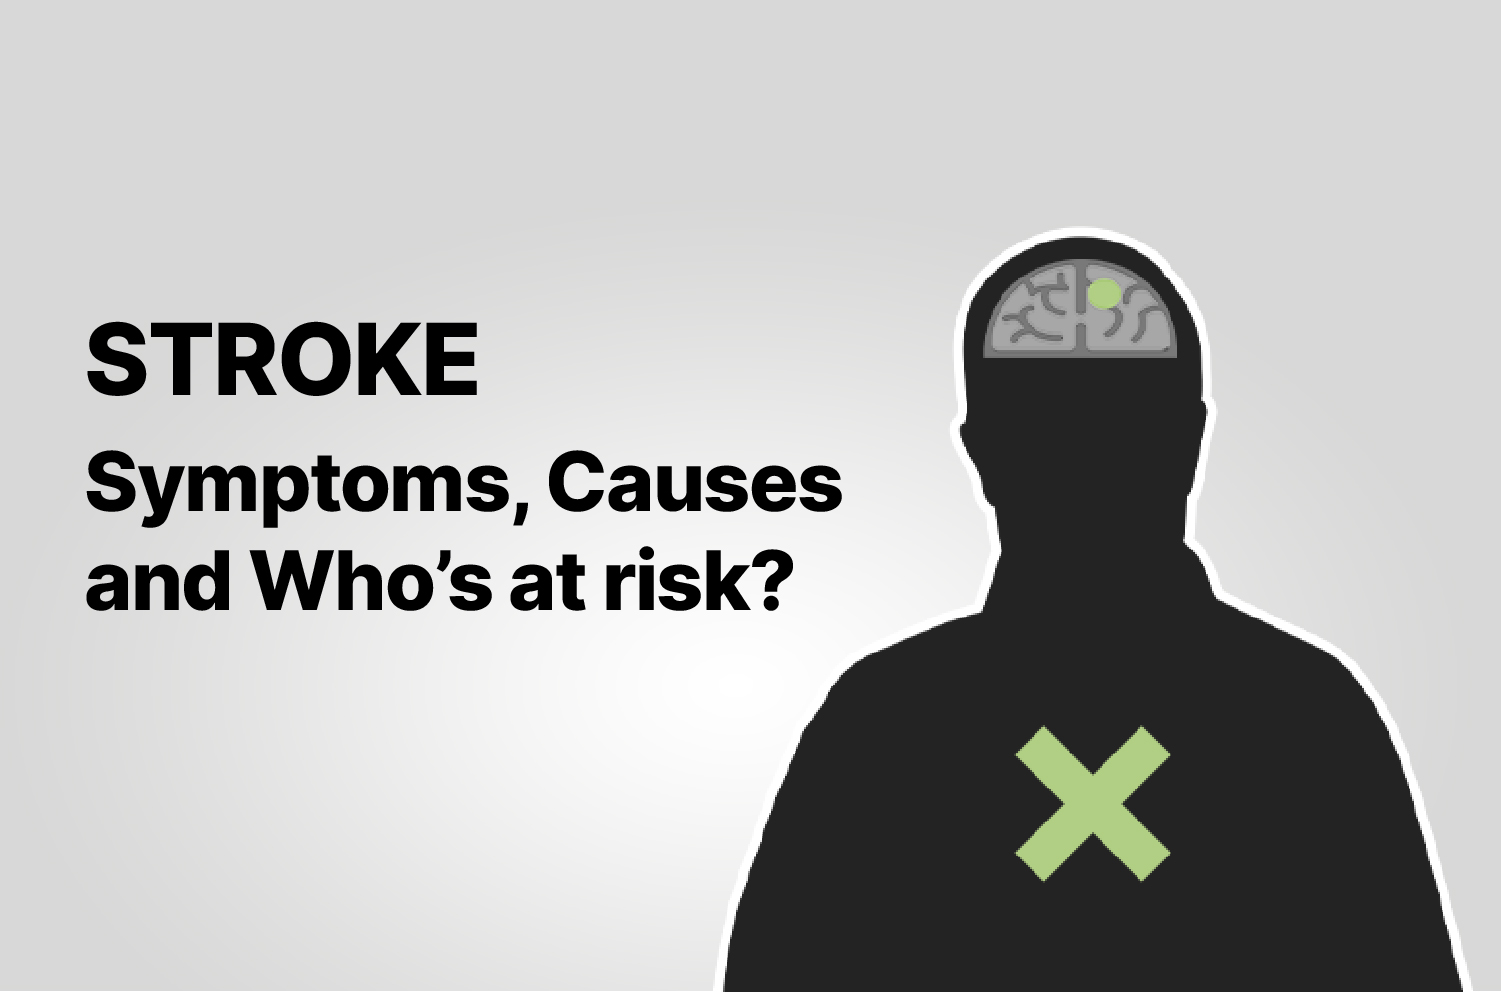 Stroke: Symptoms, Causes, and Who’s at risk?